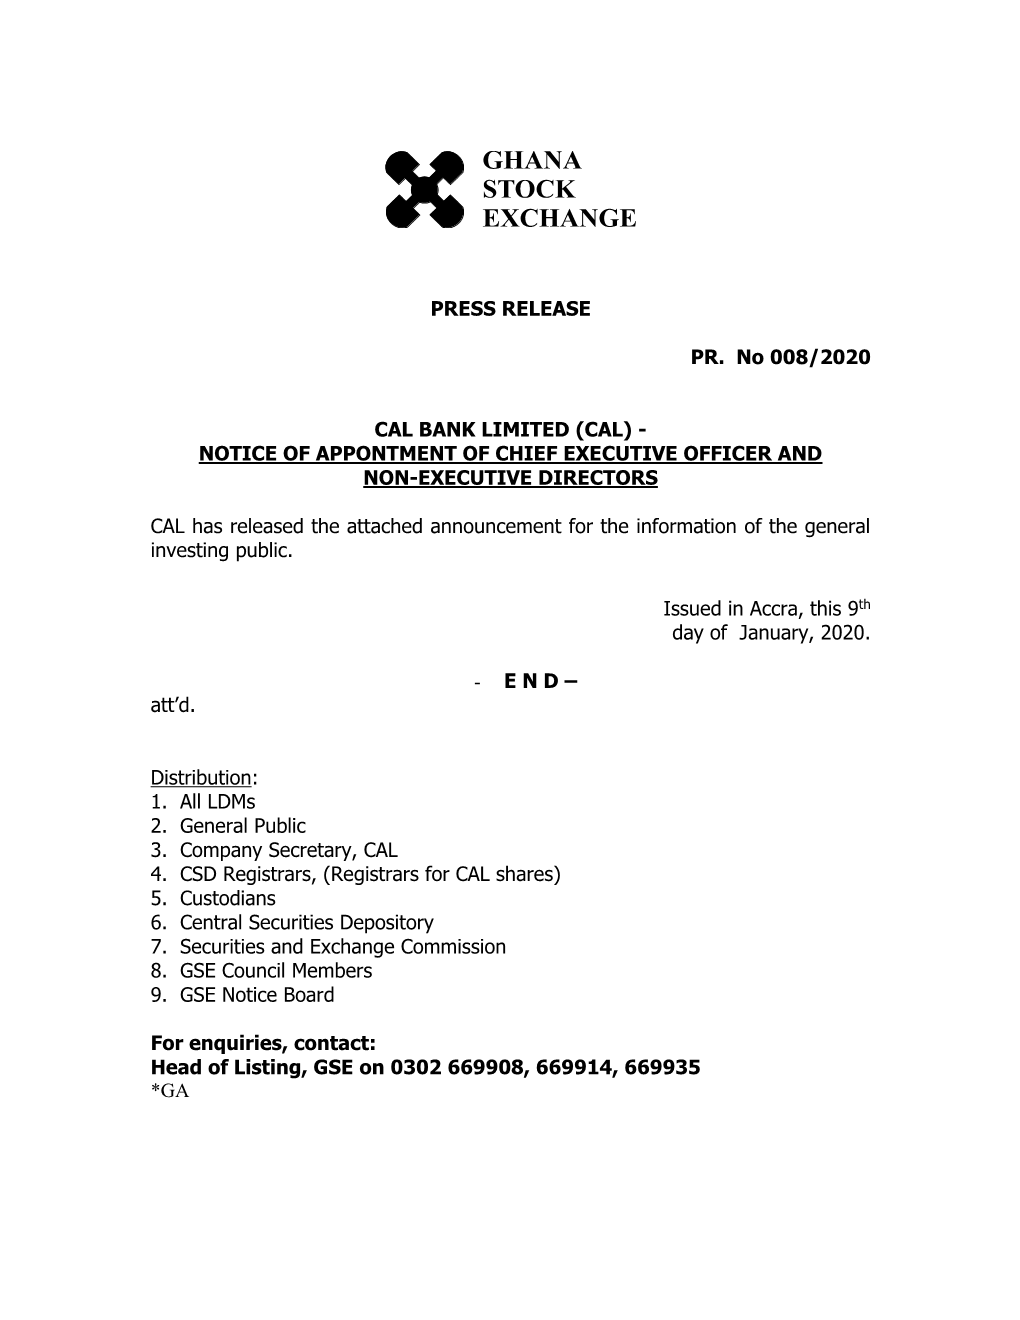 Notice of Appontment of Chief Executive Officer and Non-Executive Directors